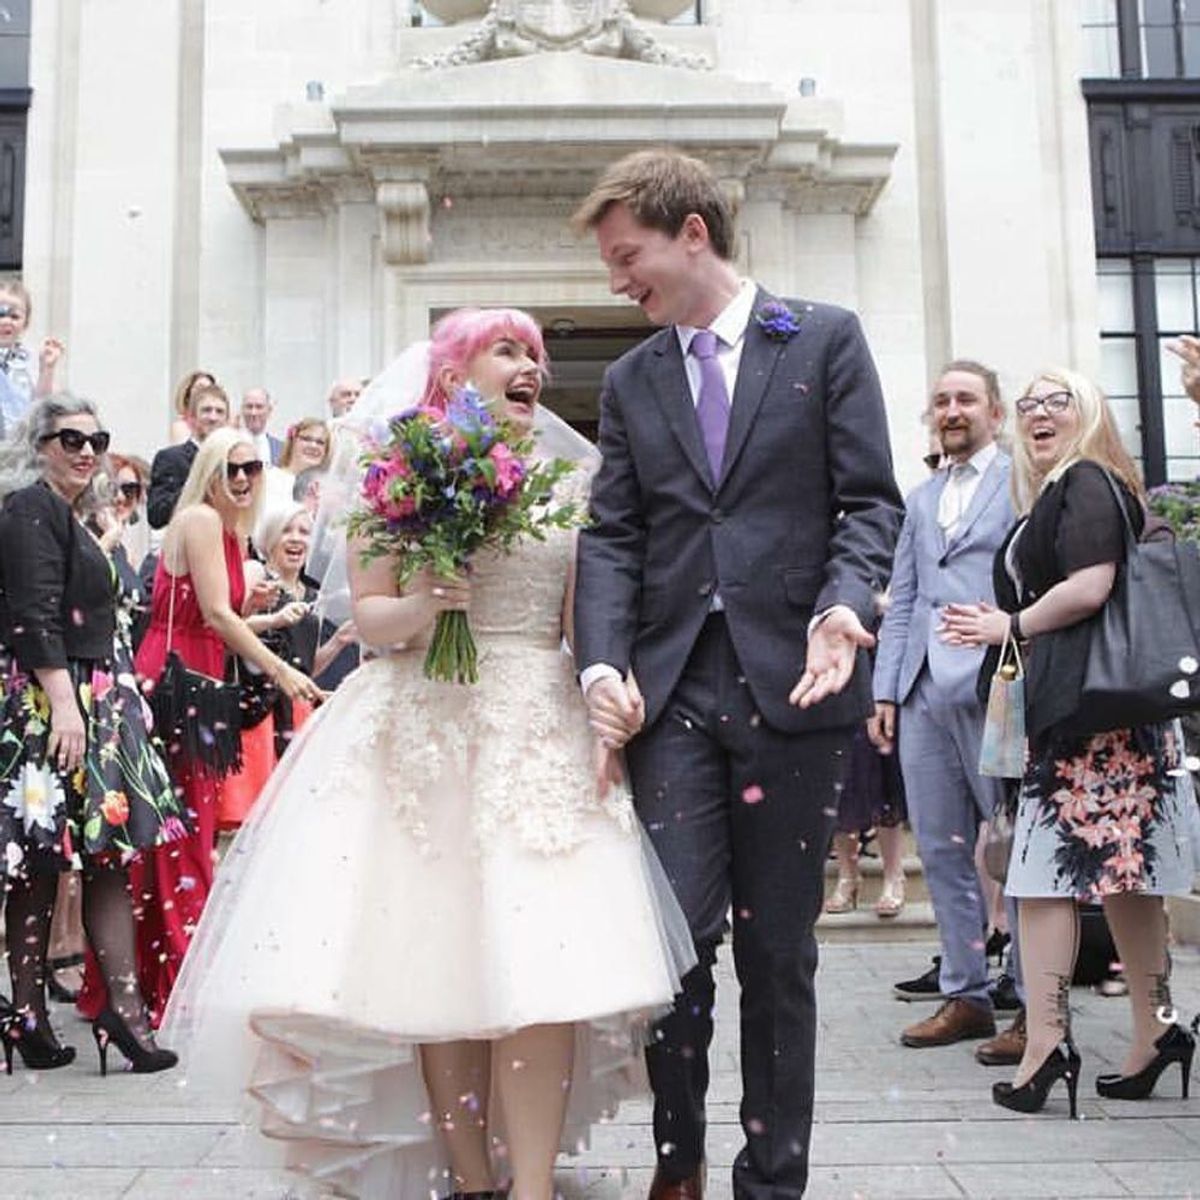 How One Tweet About Pokemon Led to An Adorable Love Story + Wedding